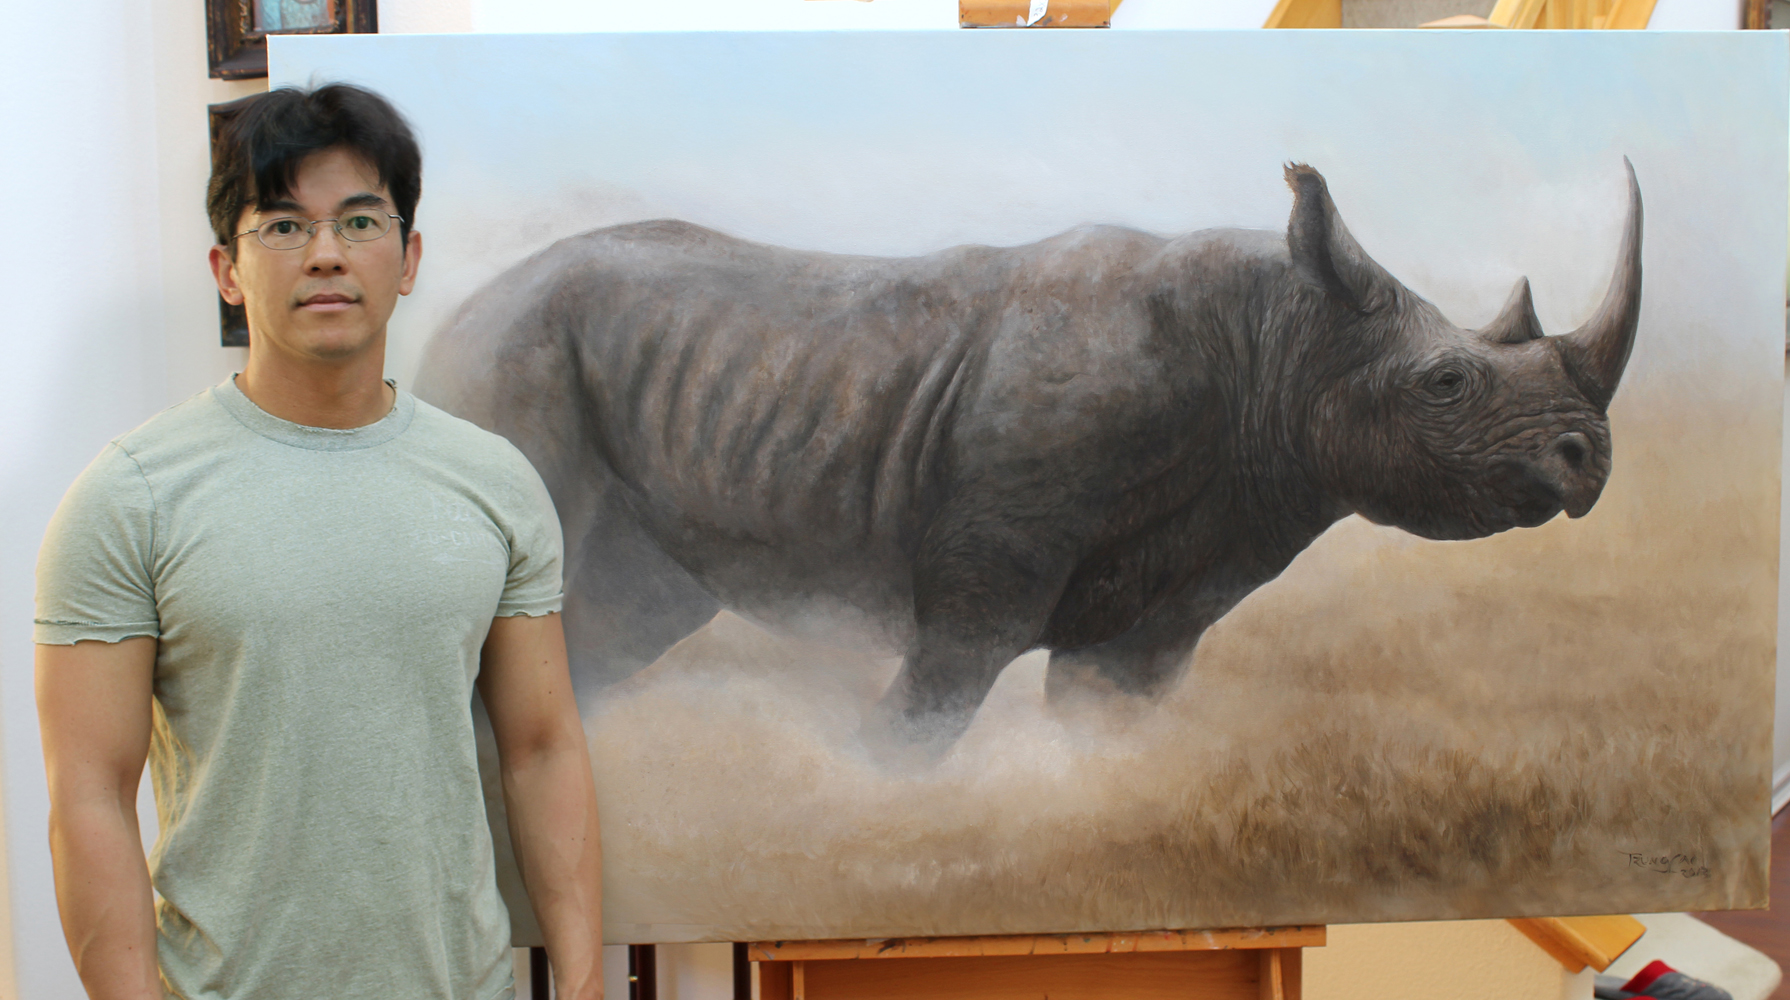 Photo with Unstoppable Black Rhino